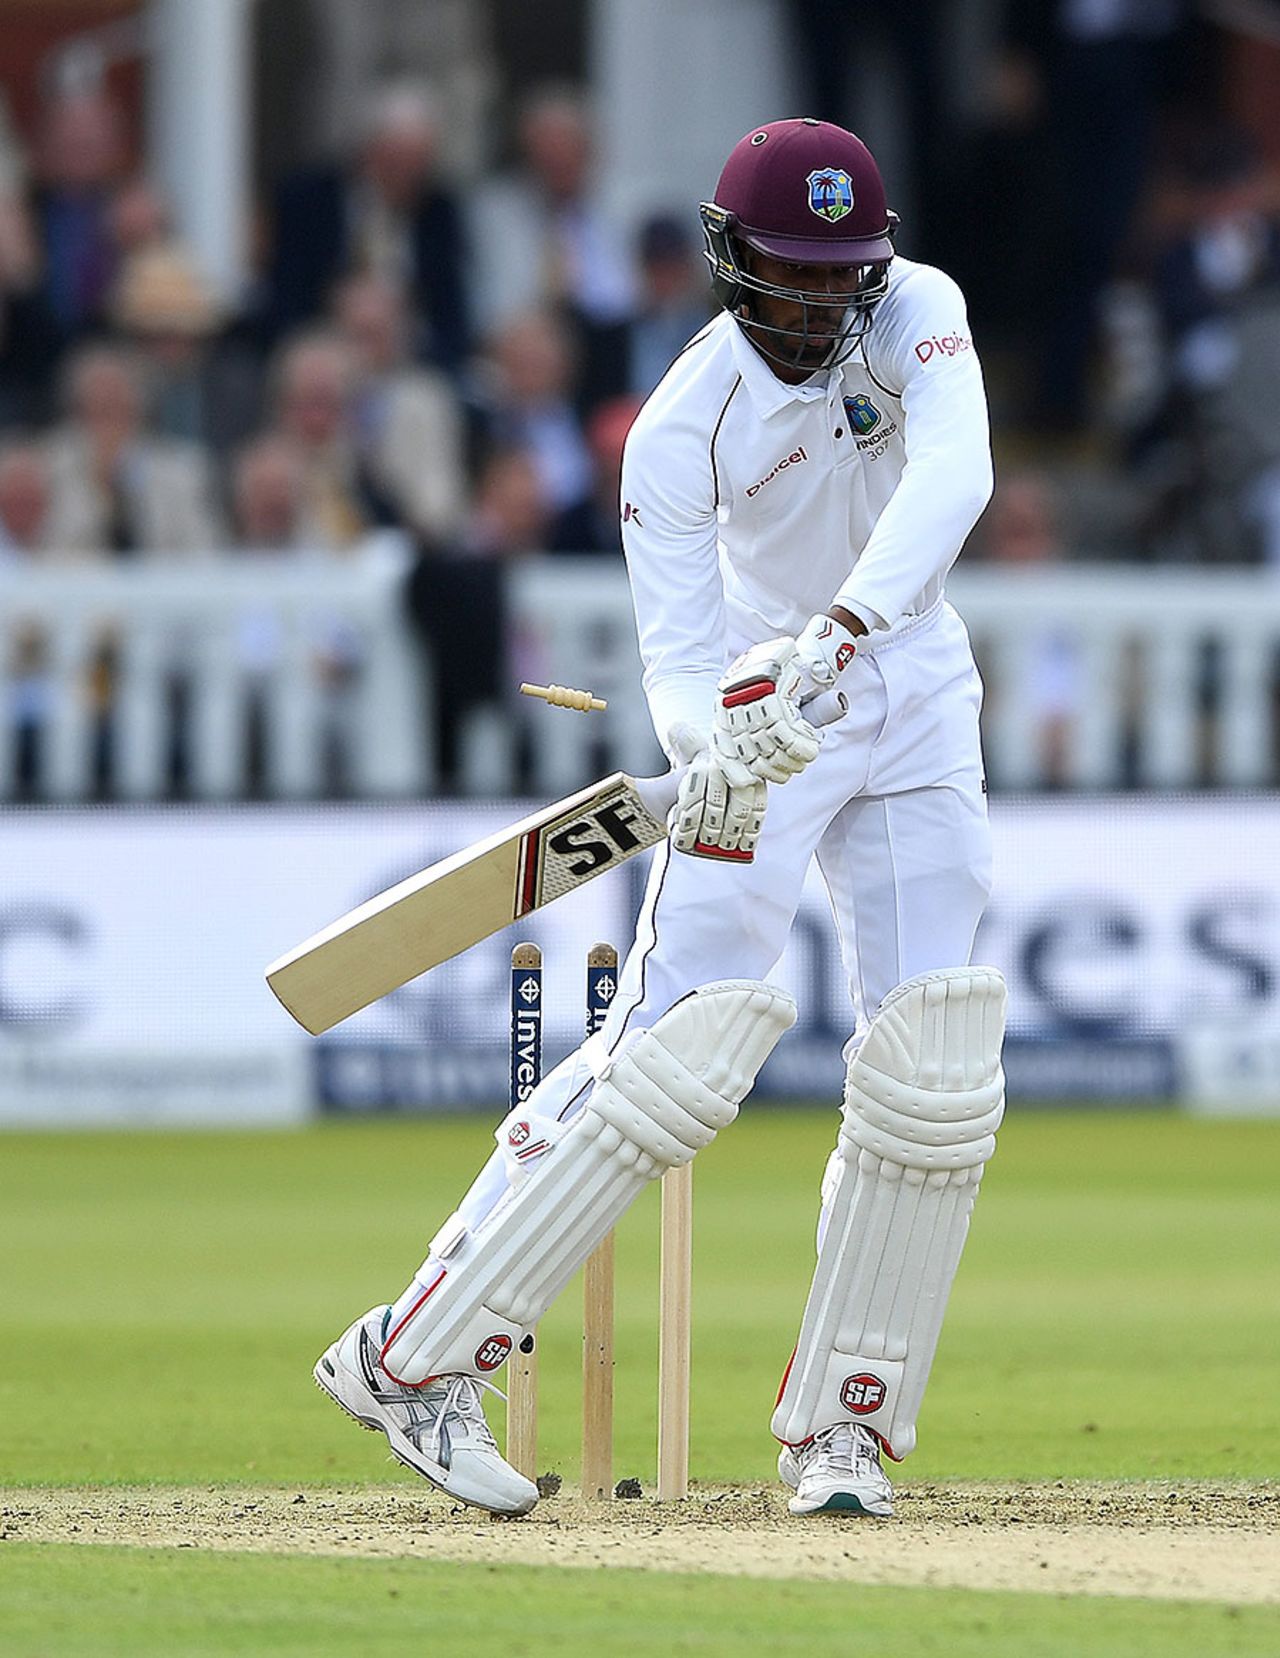 Roston Chase was bowled by an unplayable delivery from Ben Stokes, England v West Indies, 3rd Investec Test, Lord's, 1st day, September 7, 2017